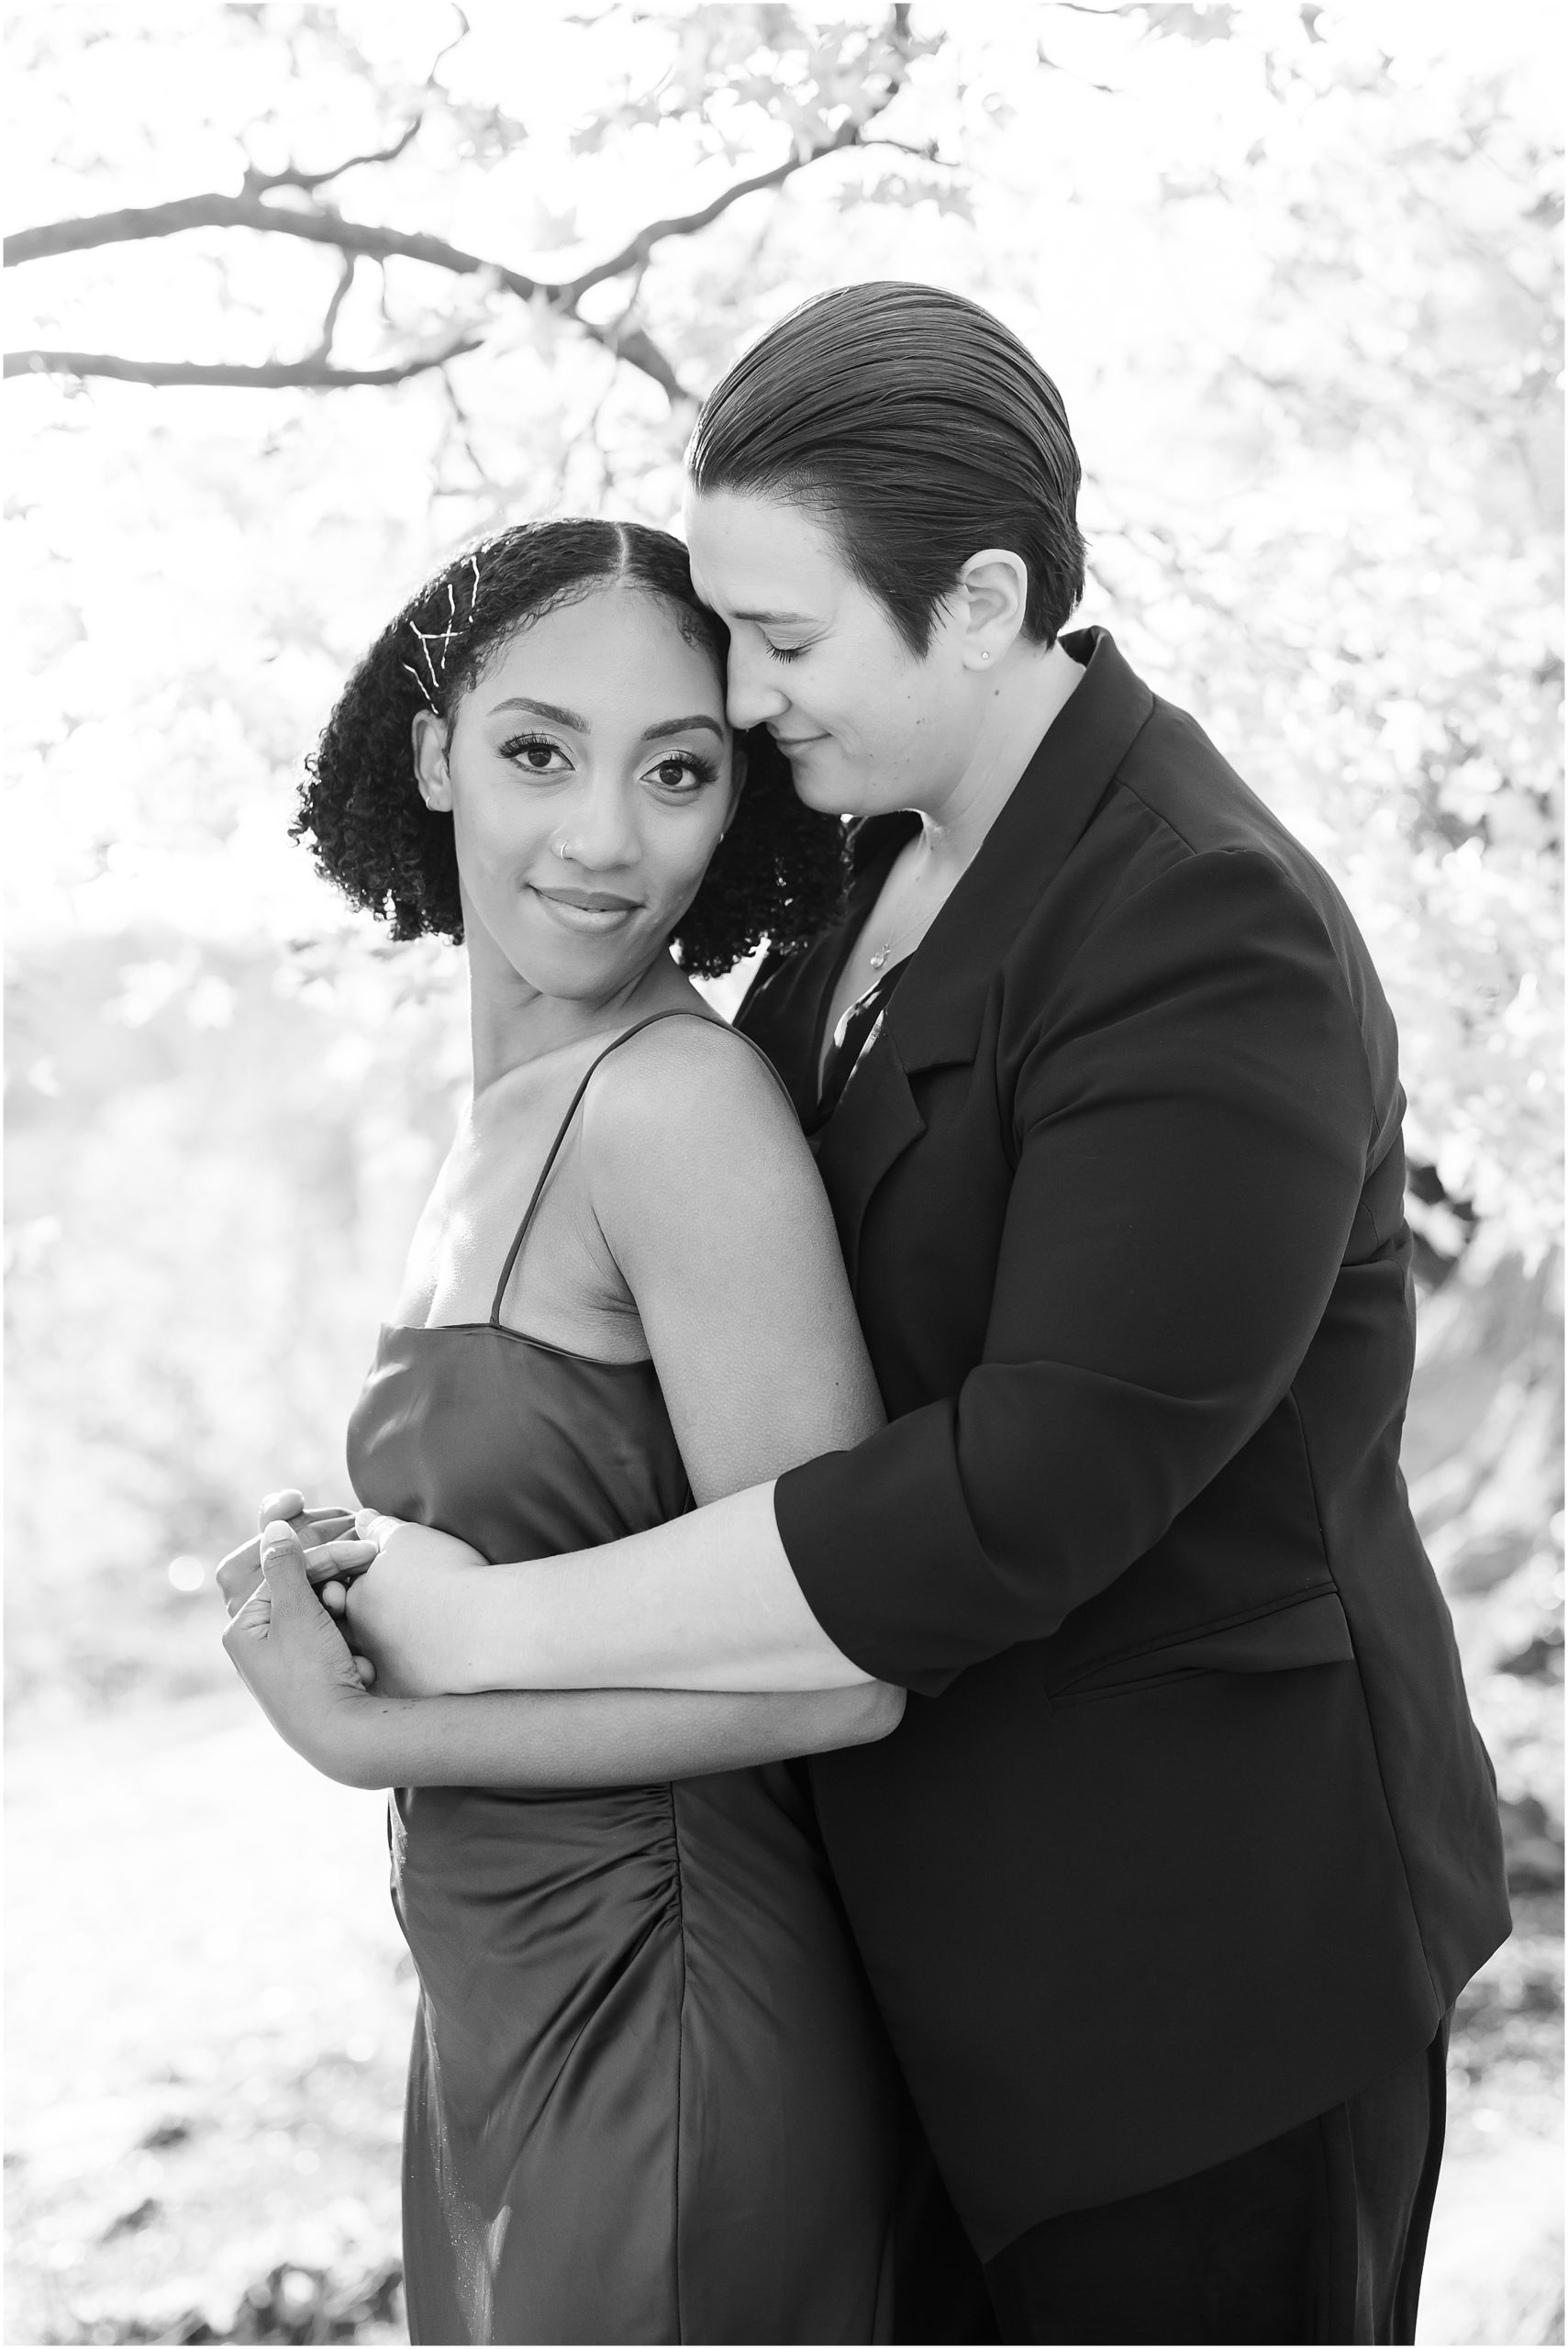 Black and white photo of couple embracing